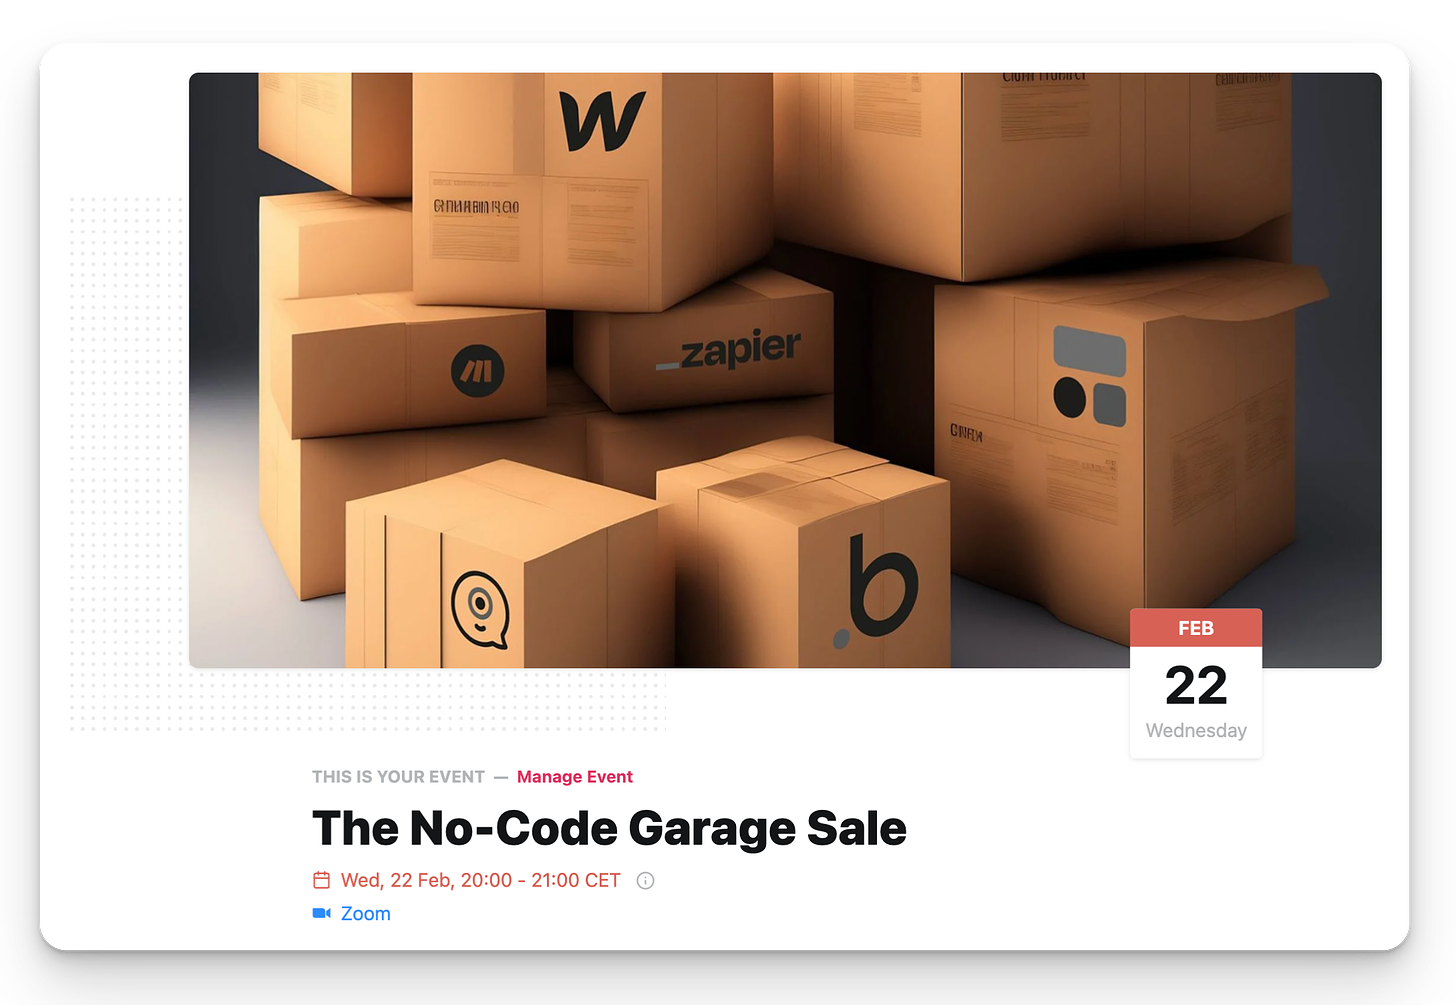 Join the second No-Code Garage Sale